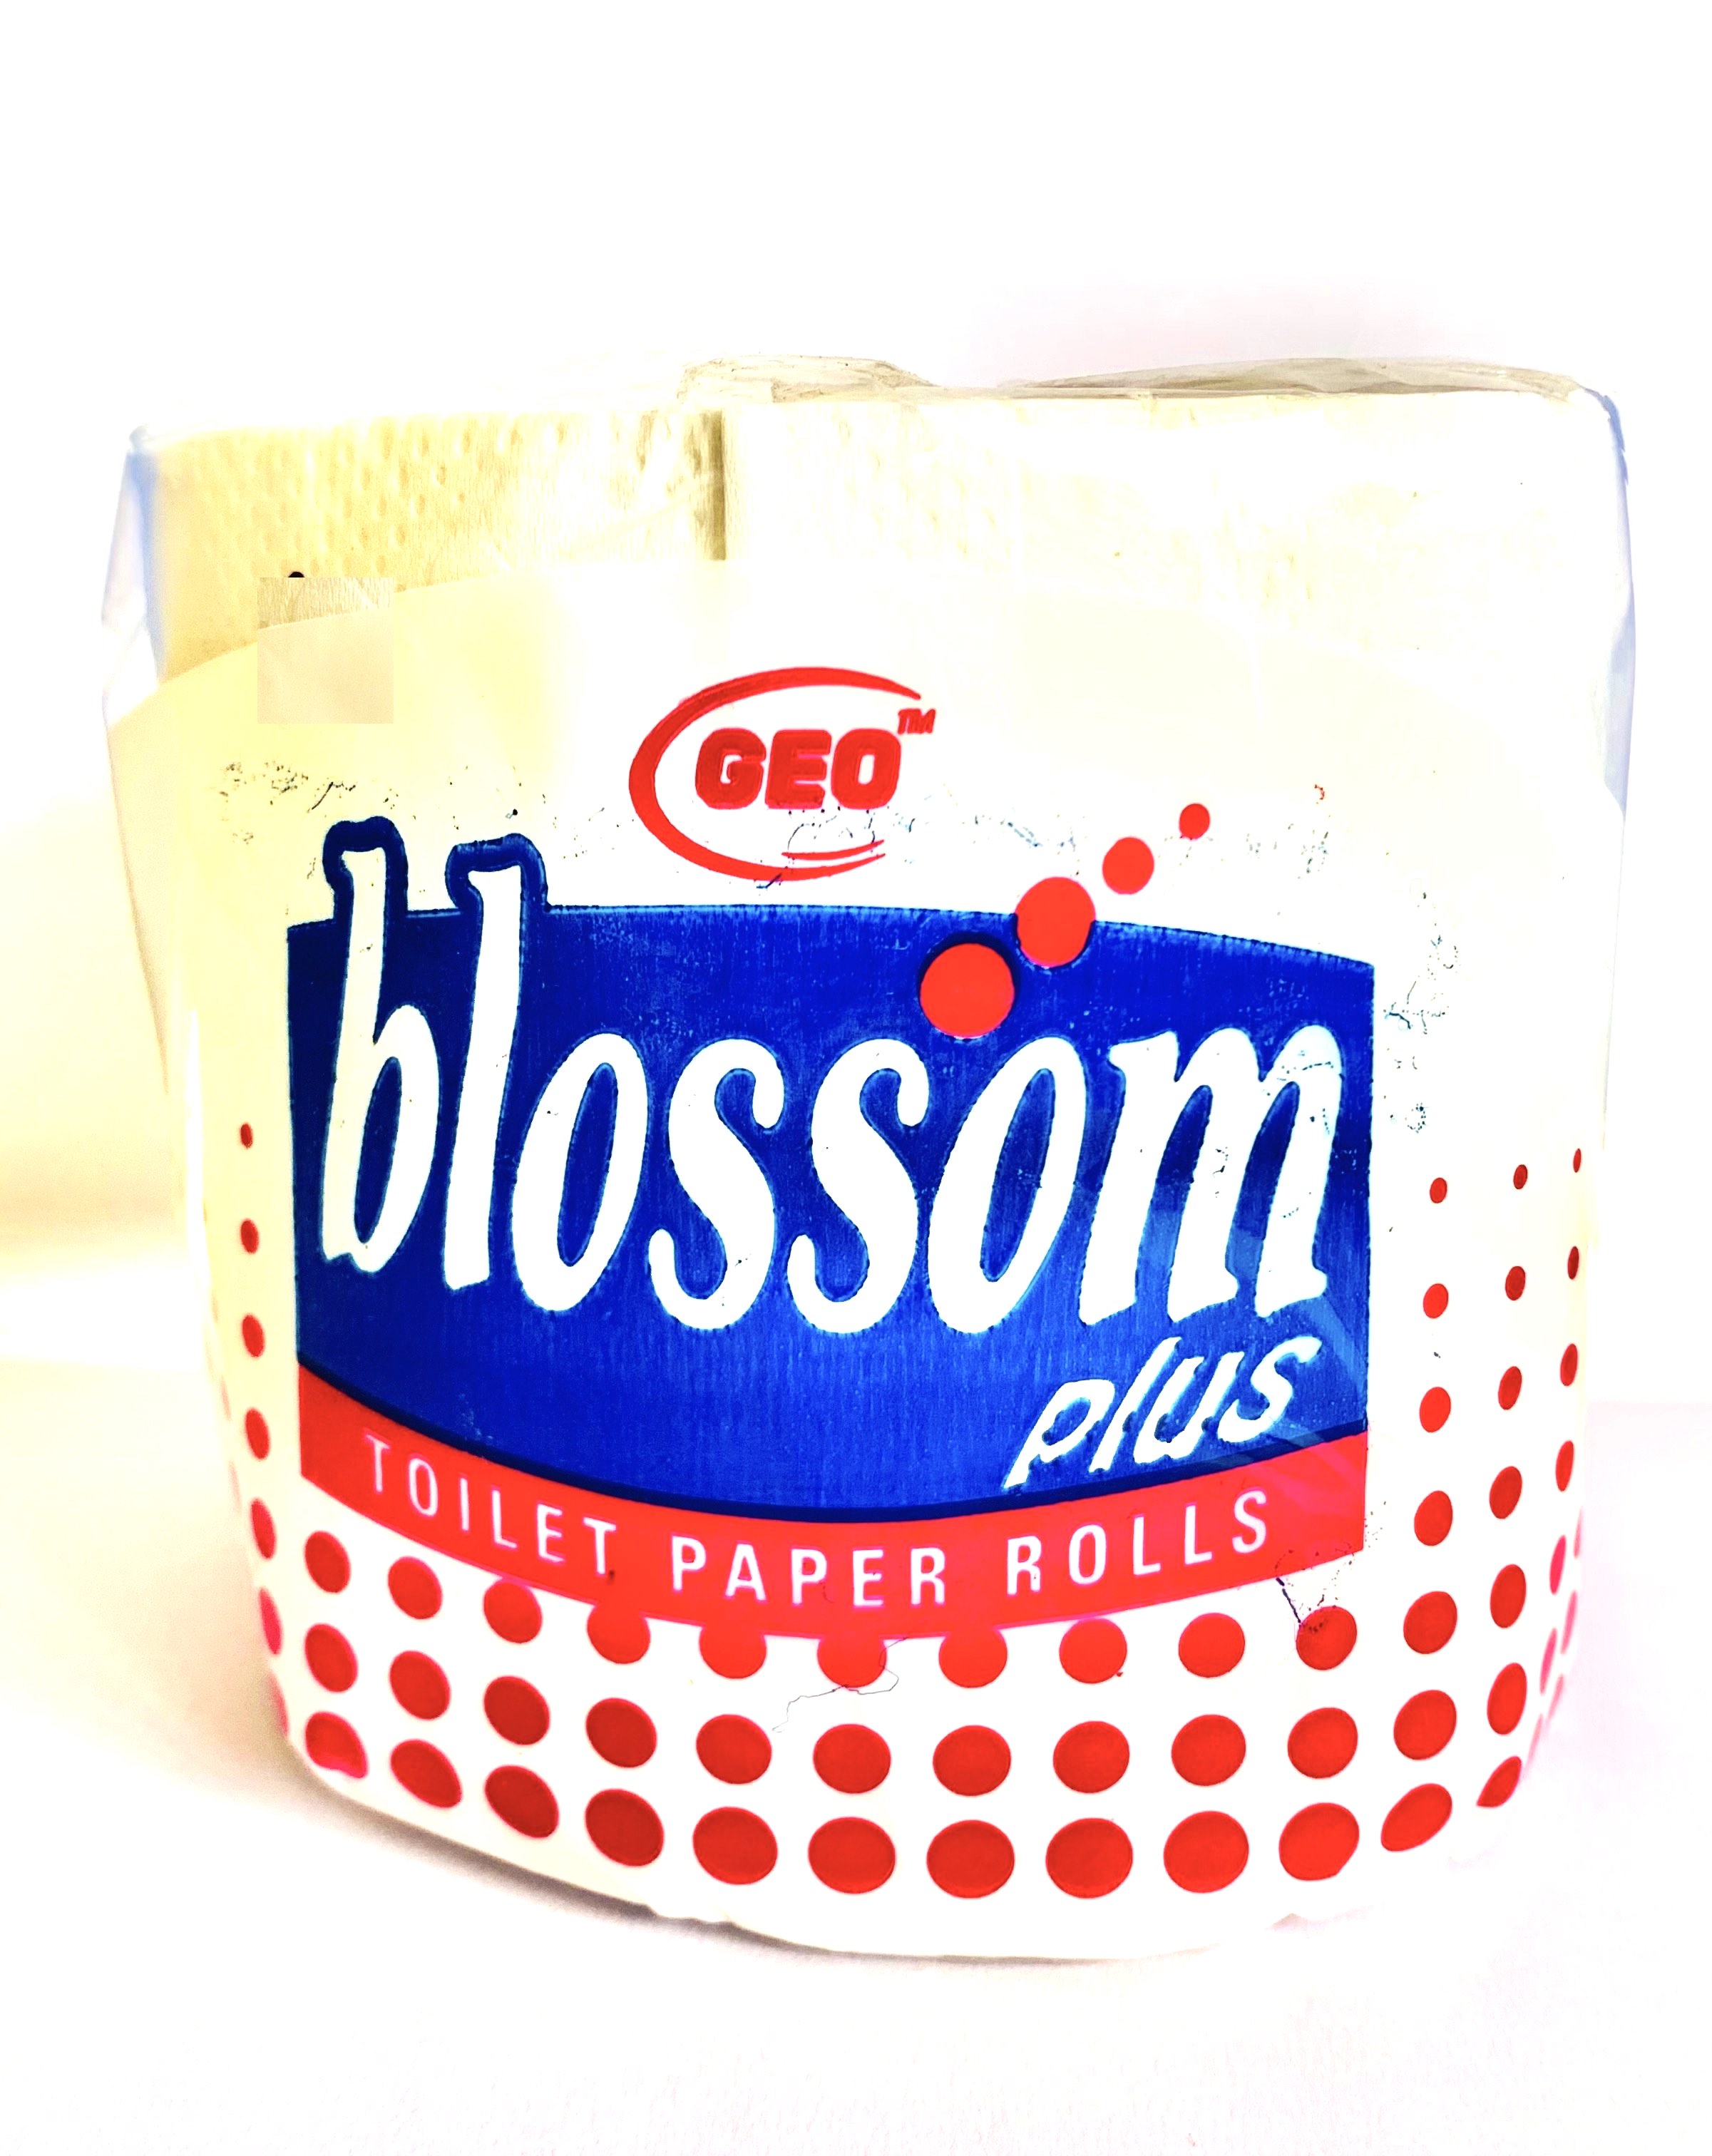 GEORGE-Blossom Plus, Toilet Paper Rolls, 2 Ply